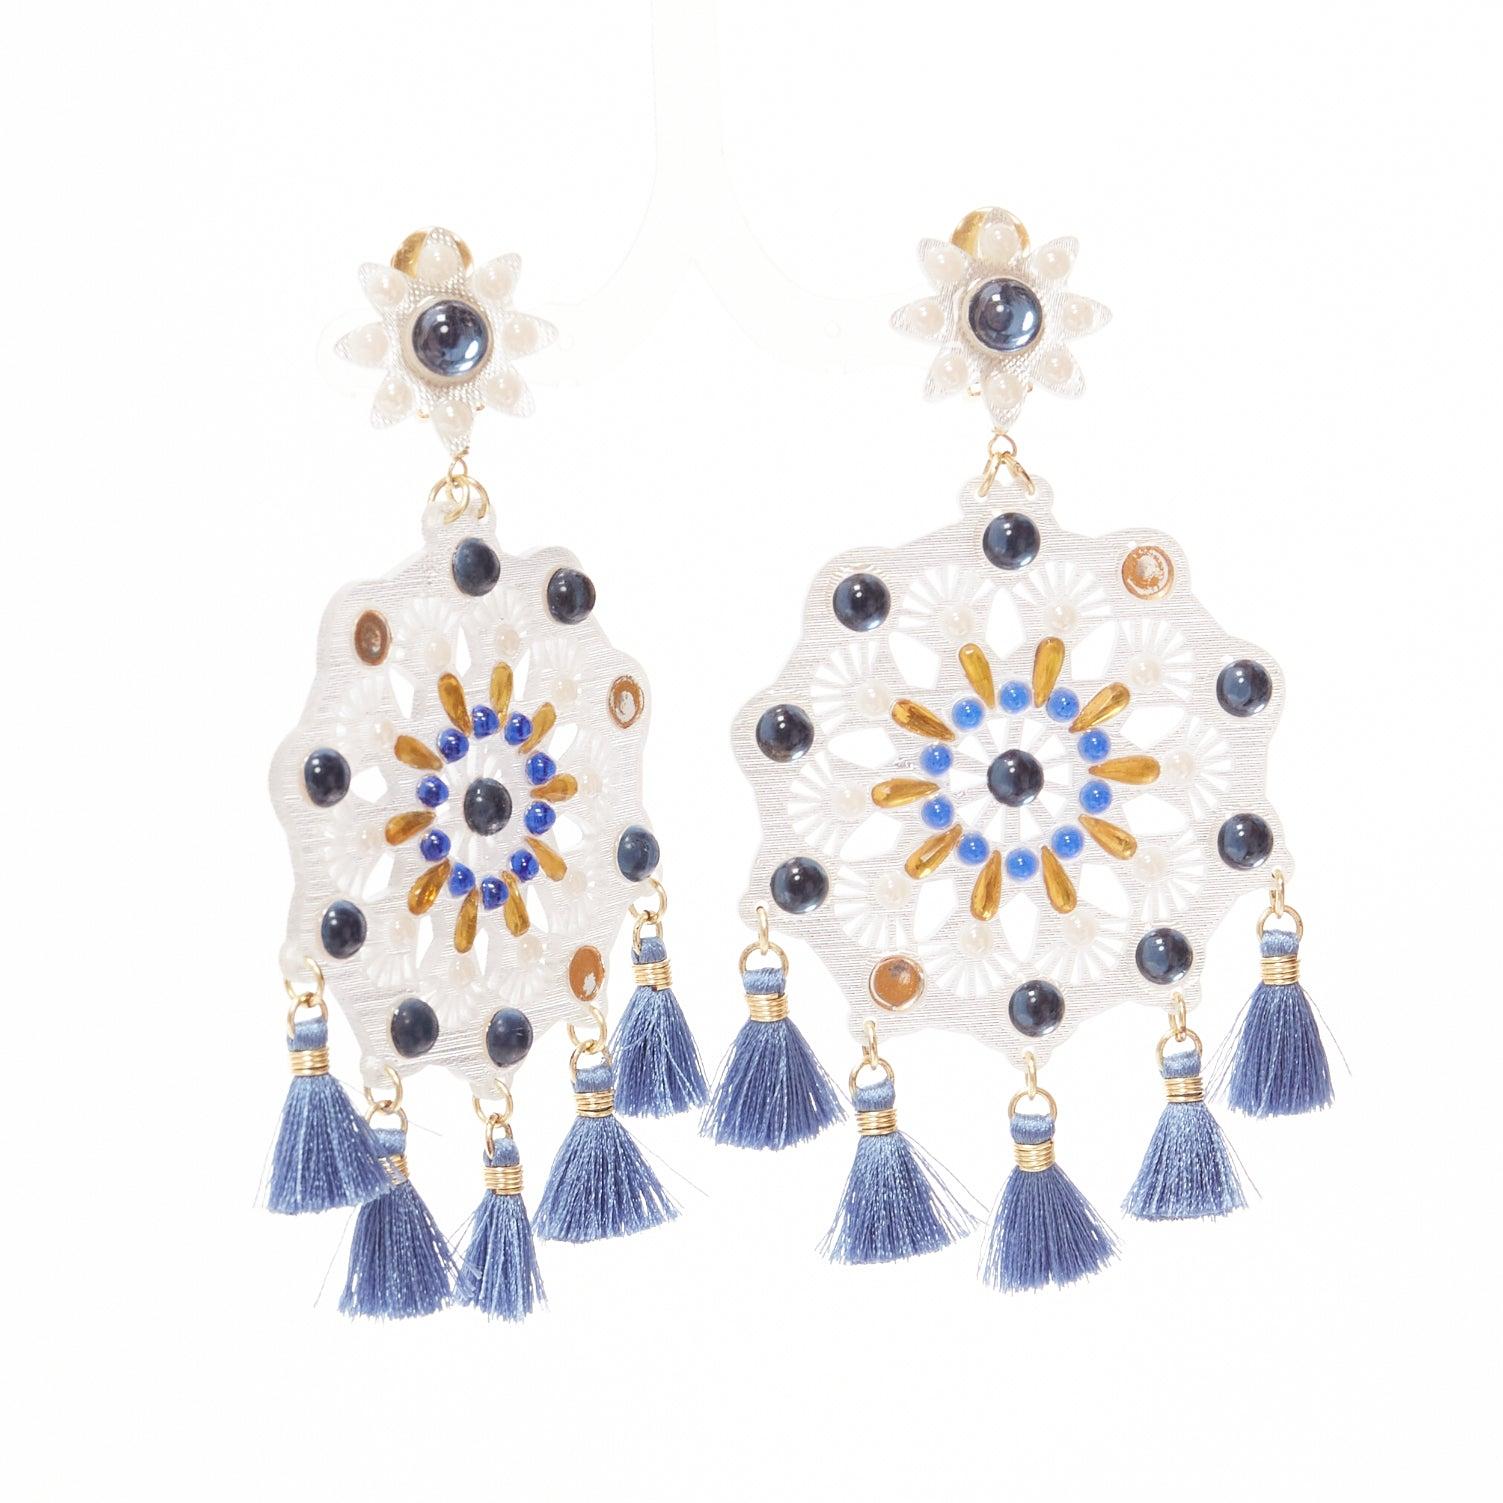 MERCEDES SALAZAR clear acrylic blue beads tassels clip on drop earrings
Reference: AAWC/A01257
Brand: Mercedes Salazar
Material: Acrylic
Color: Clear, Blue
Pattern: Solid
Closure: Clip On
Lining: Gold Metal

CONDITION:
Condition: Poor, this item was